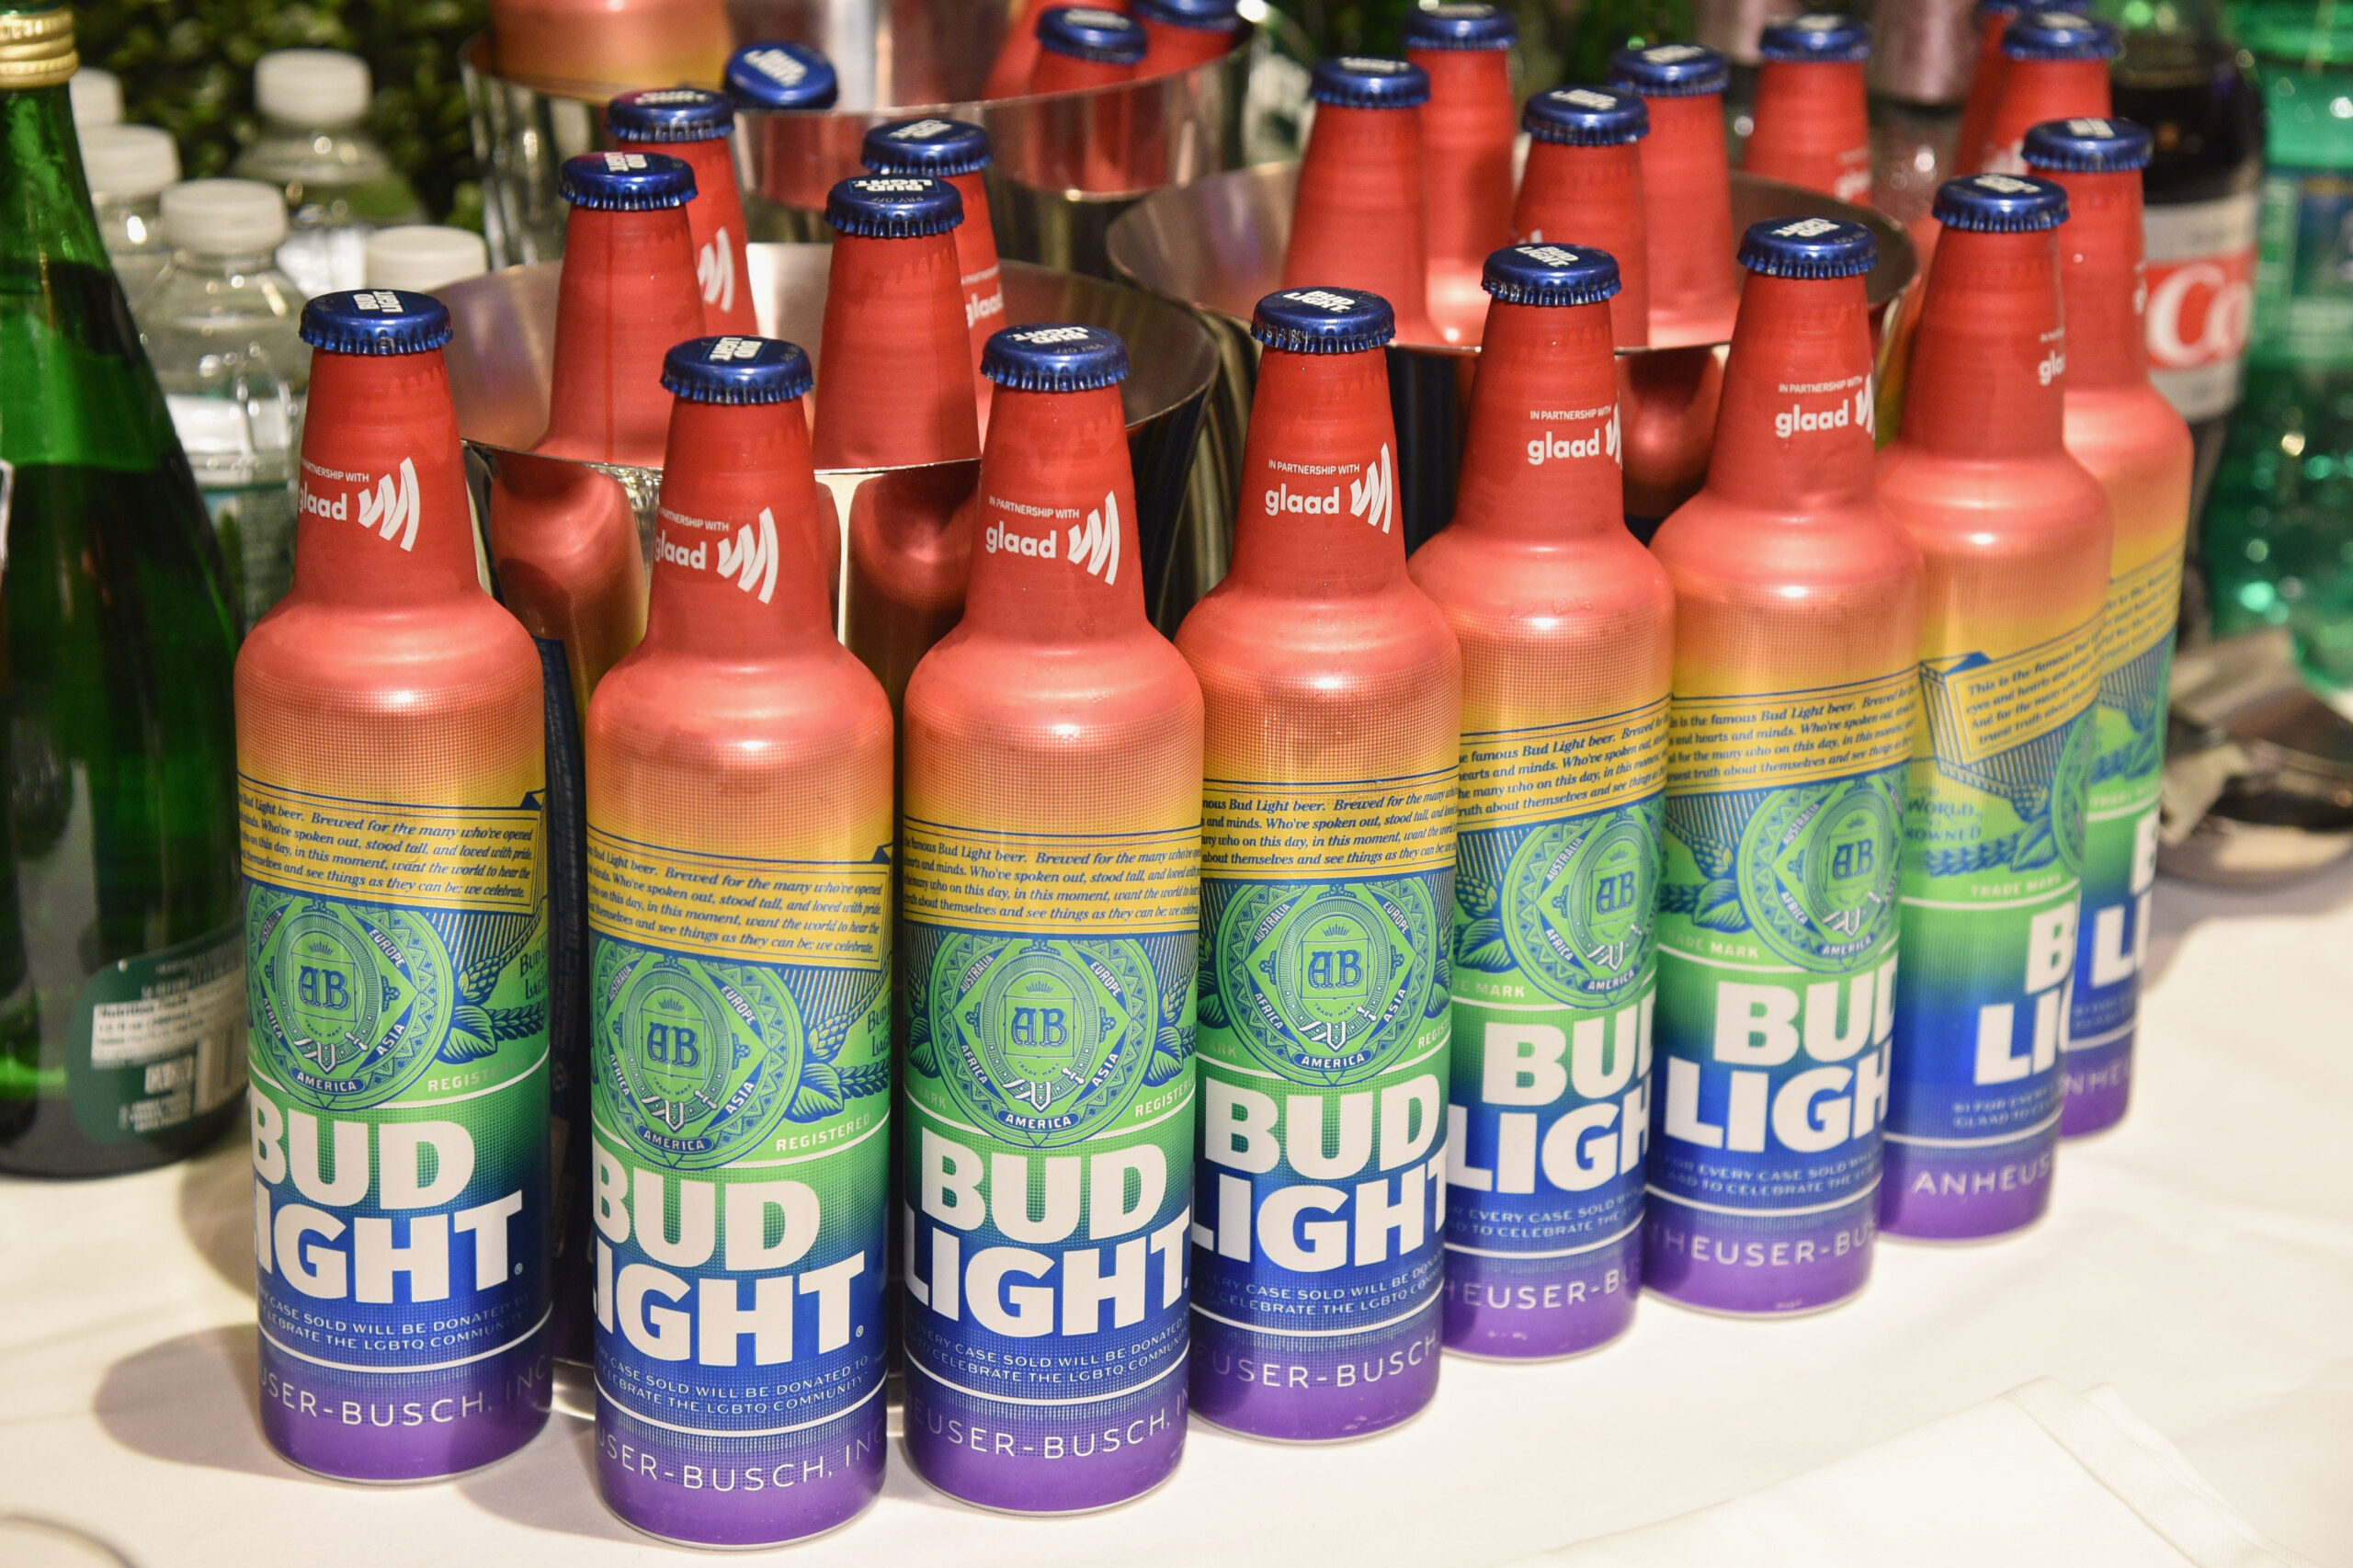 Bud Light sales dip after trans promotion, but such boycotts are